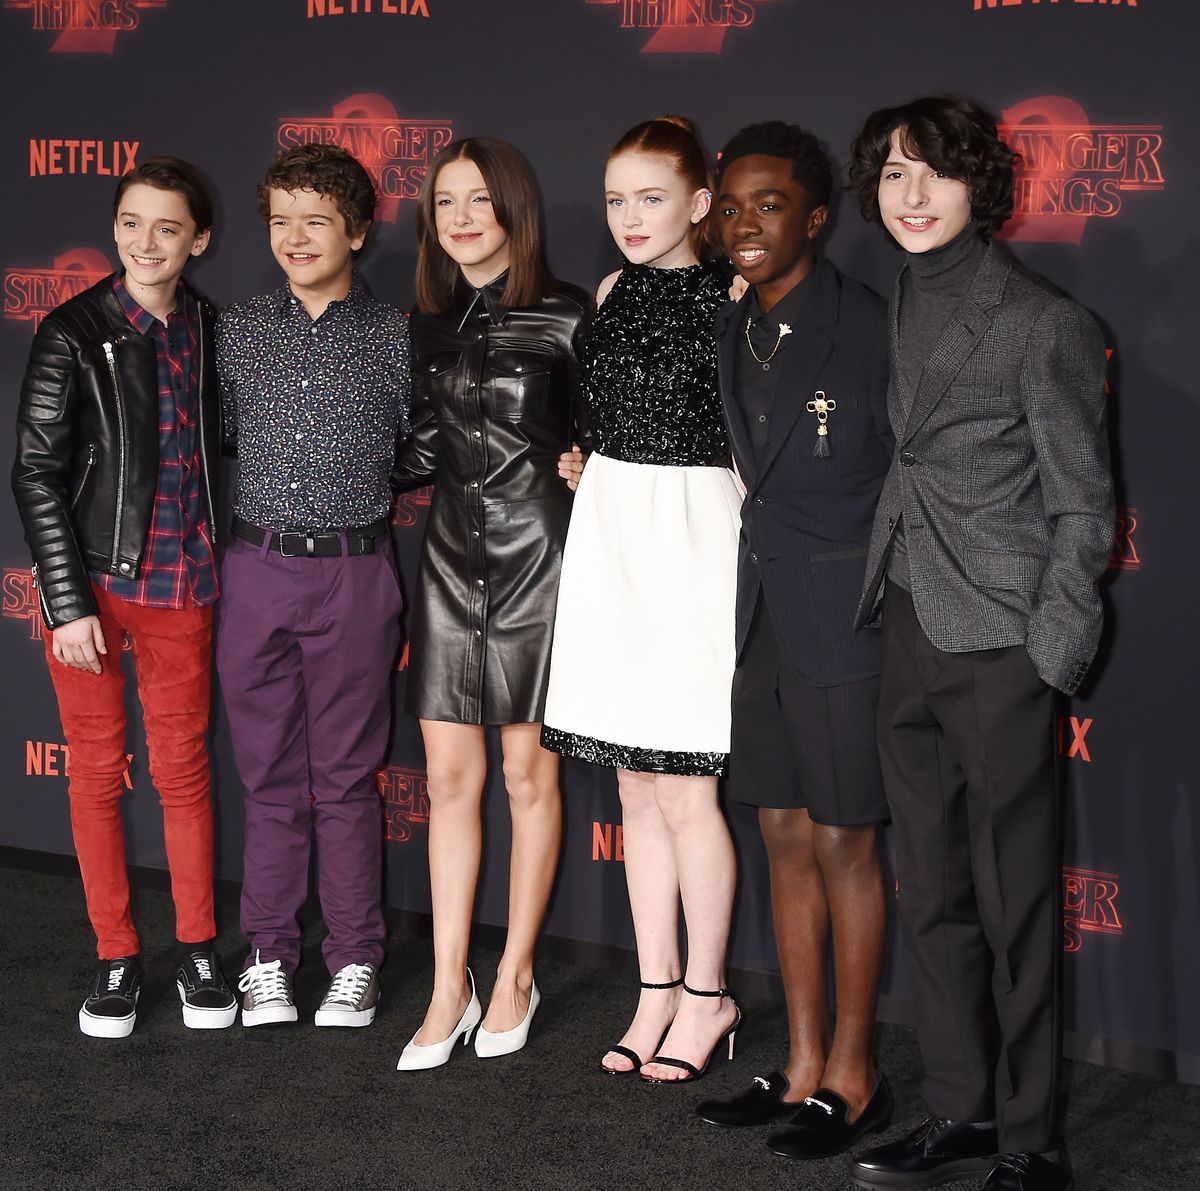 Stranger Things' cast reveals how they dealt with aging while filming  Season 4